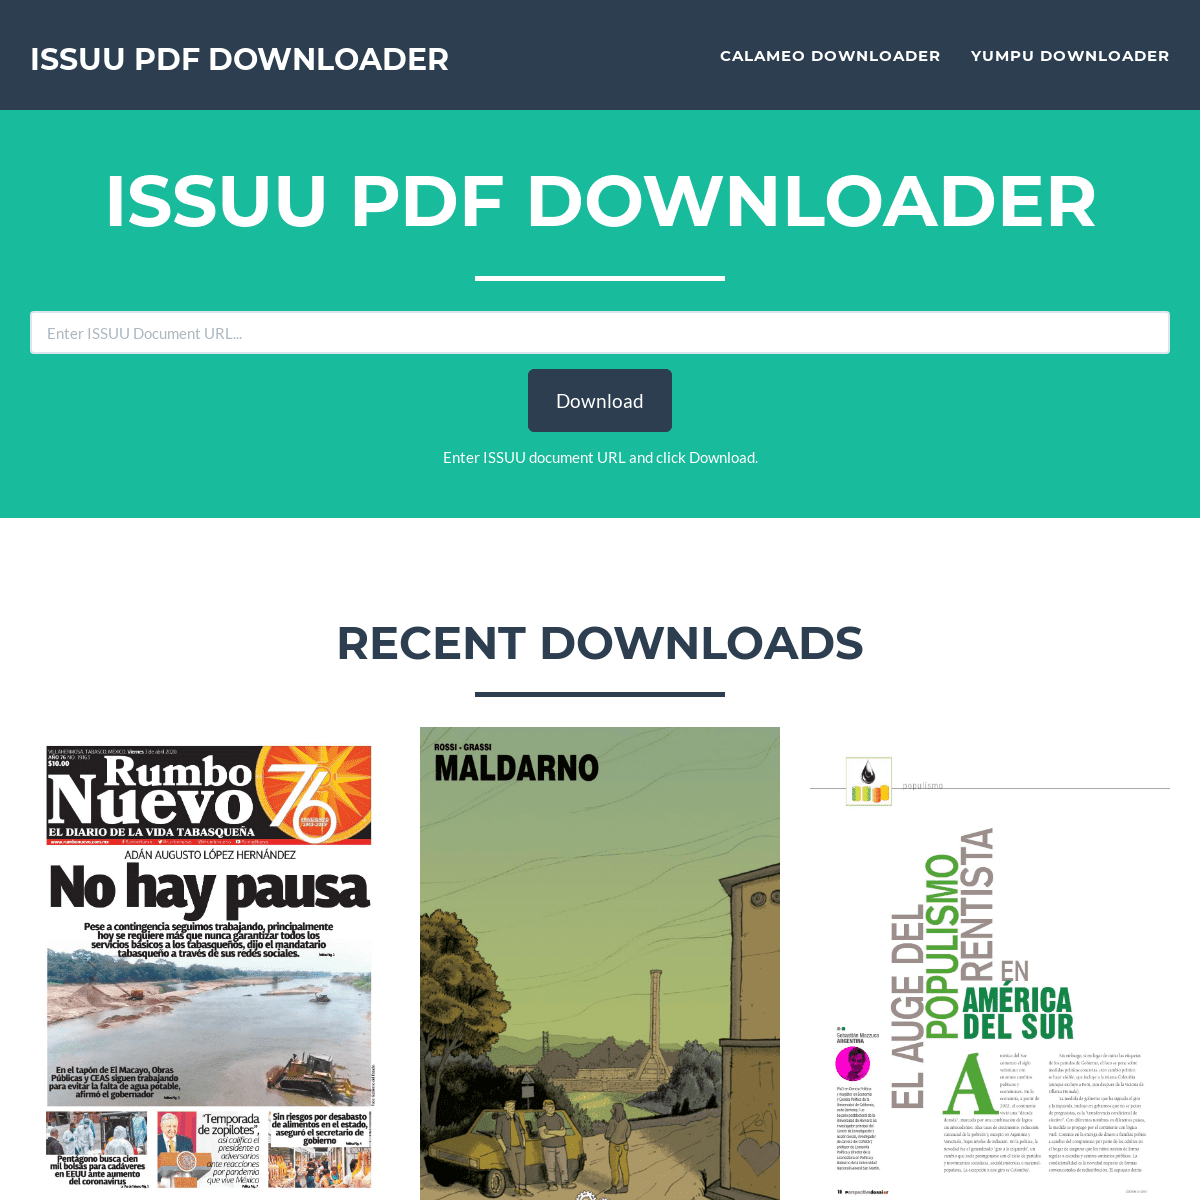 download pdf from issuu